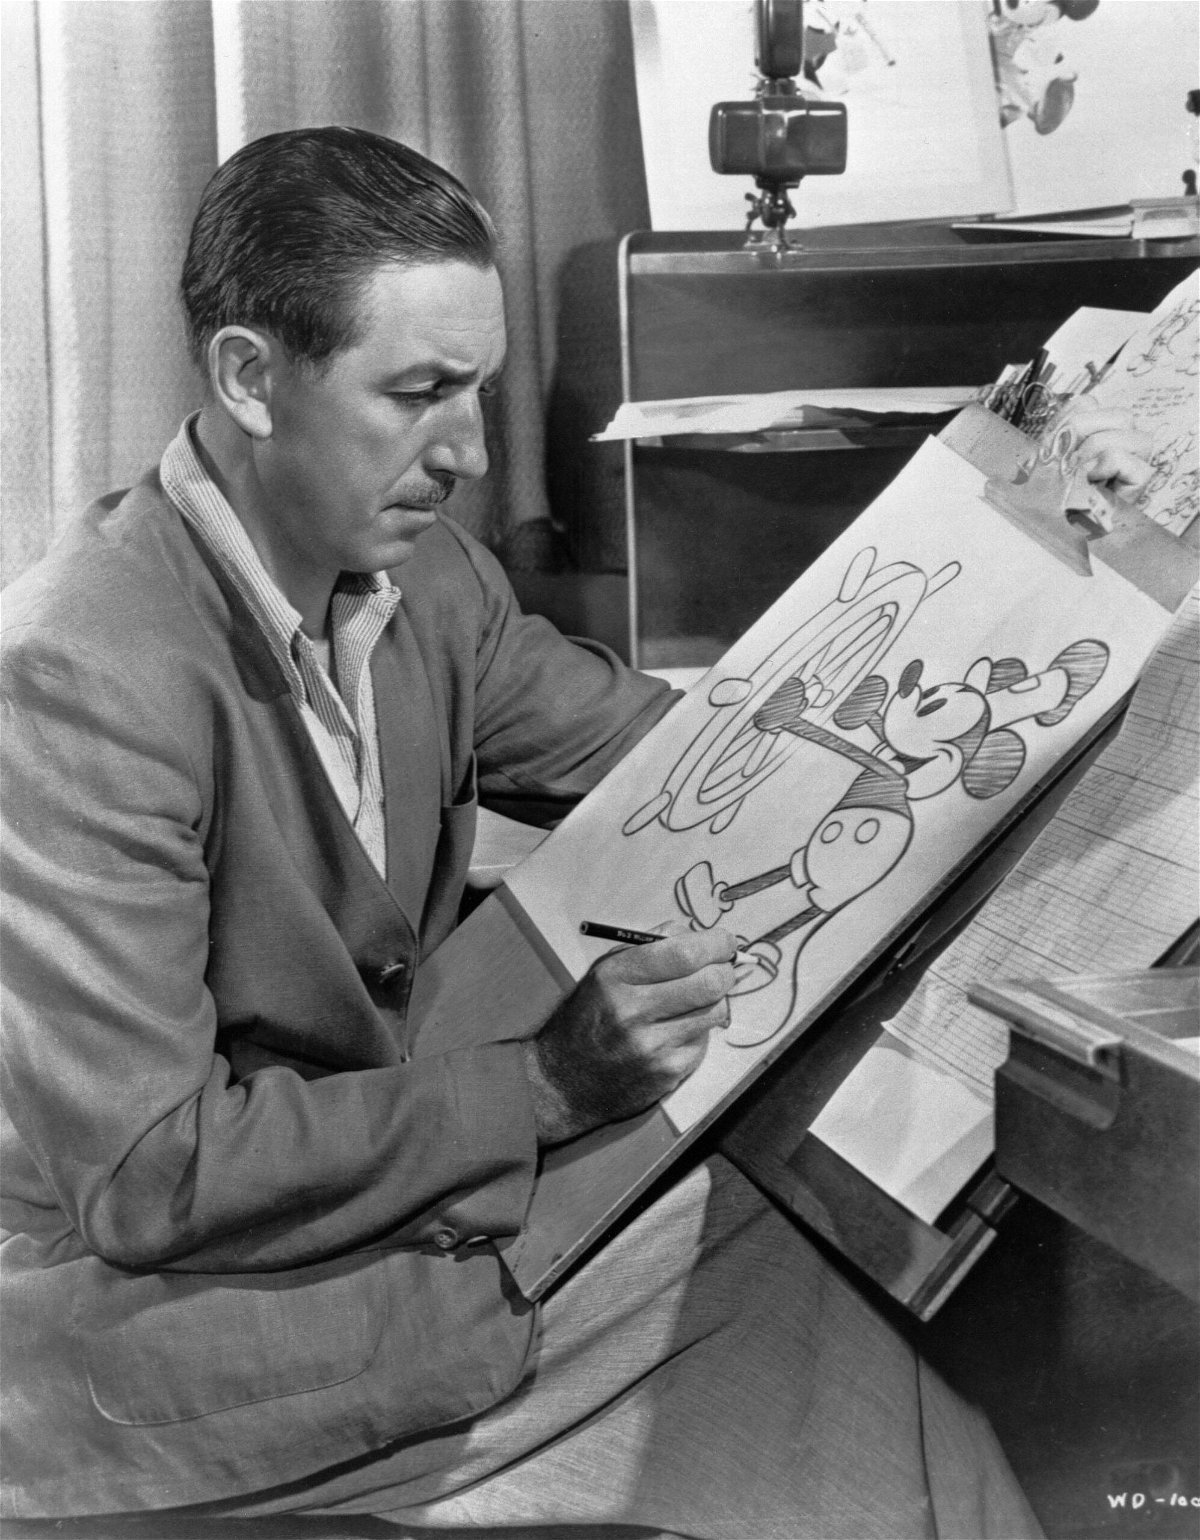 <i>Photo 12/Alamy Stock Photo</i><br/>American animator and producer Walt Disney is pictured drawing Mickey Mouse Steamboat Willie Ca 1943.  The early version of Disney’s Mickey Mouse will enter the public domain on January 1